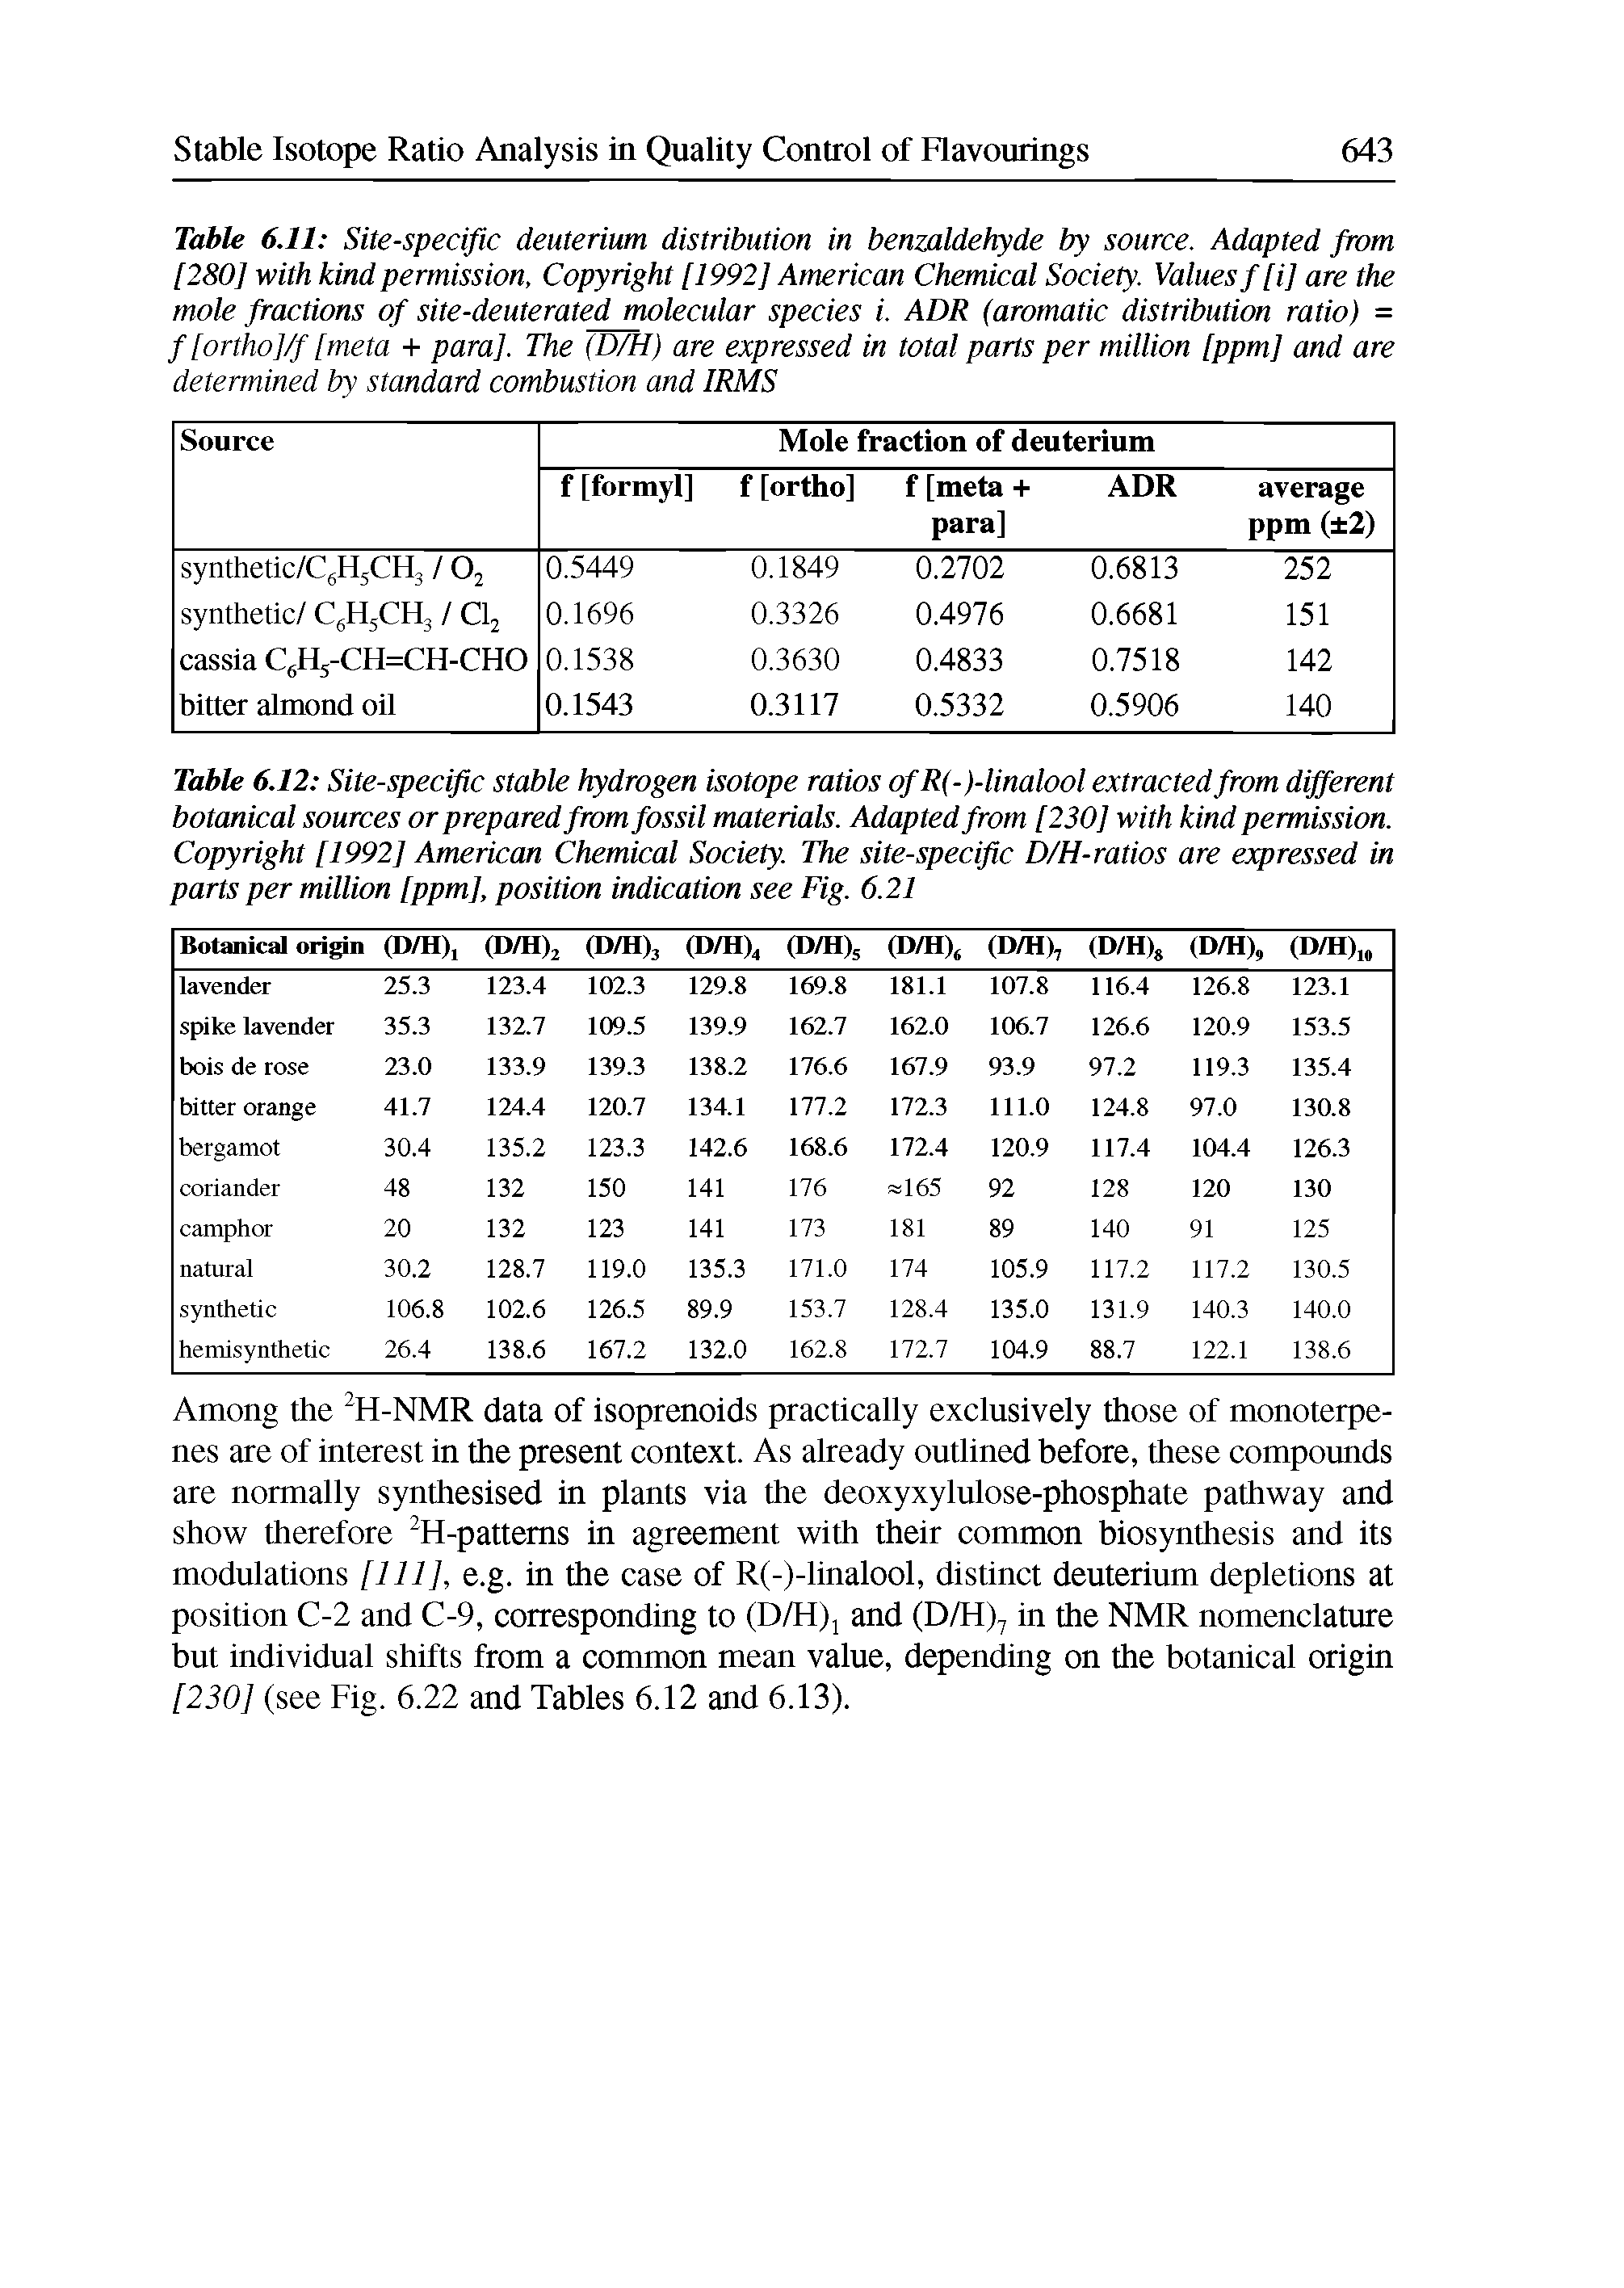 Table 6.12 Site-specific stable hydrogen isotope ratios ofR(-)-linalool extracted from different botanical sources or prepared from fossil materials. Adapted from [230] with kind permission. Copyright [1992] American Chemical Society. The site-specific D/H-ratios are expressed in parts per million [ppm], position indication see Fig. 6.21...